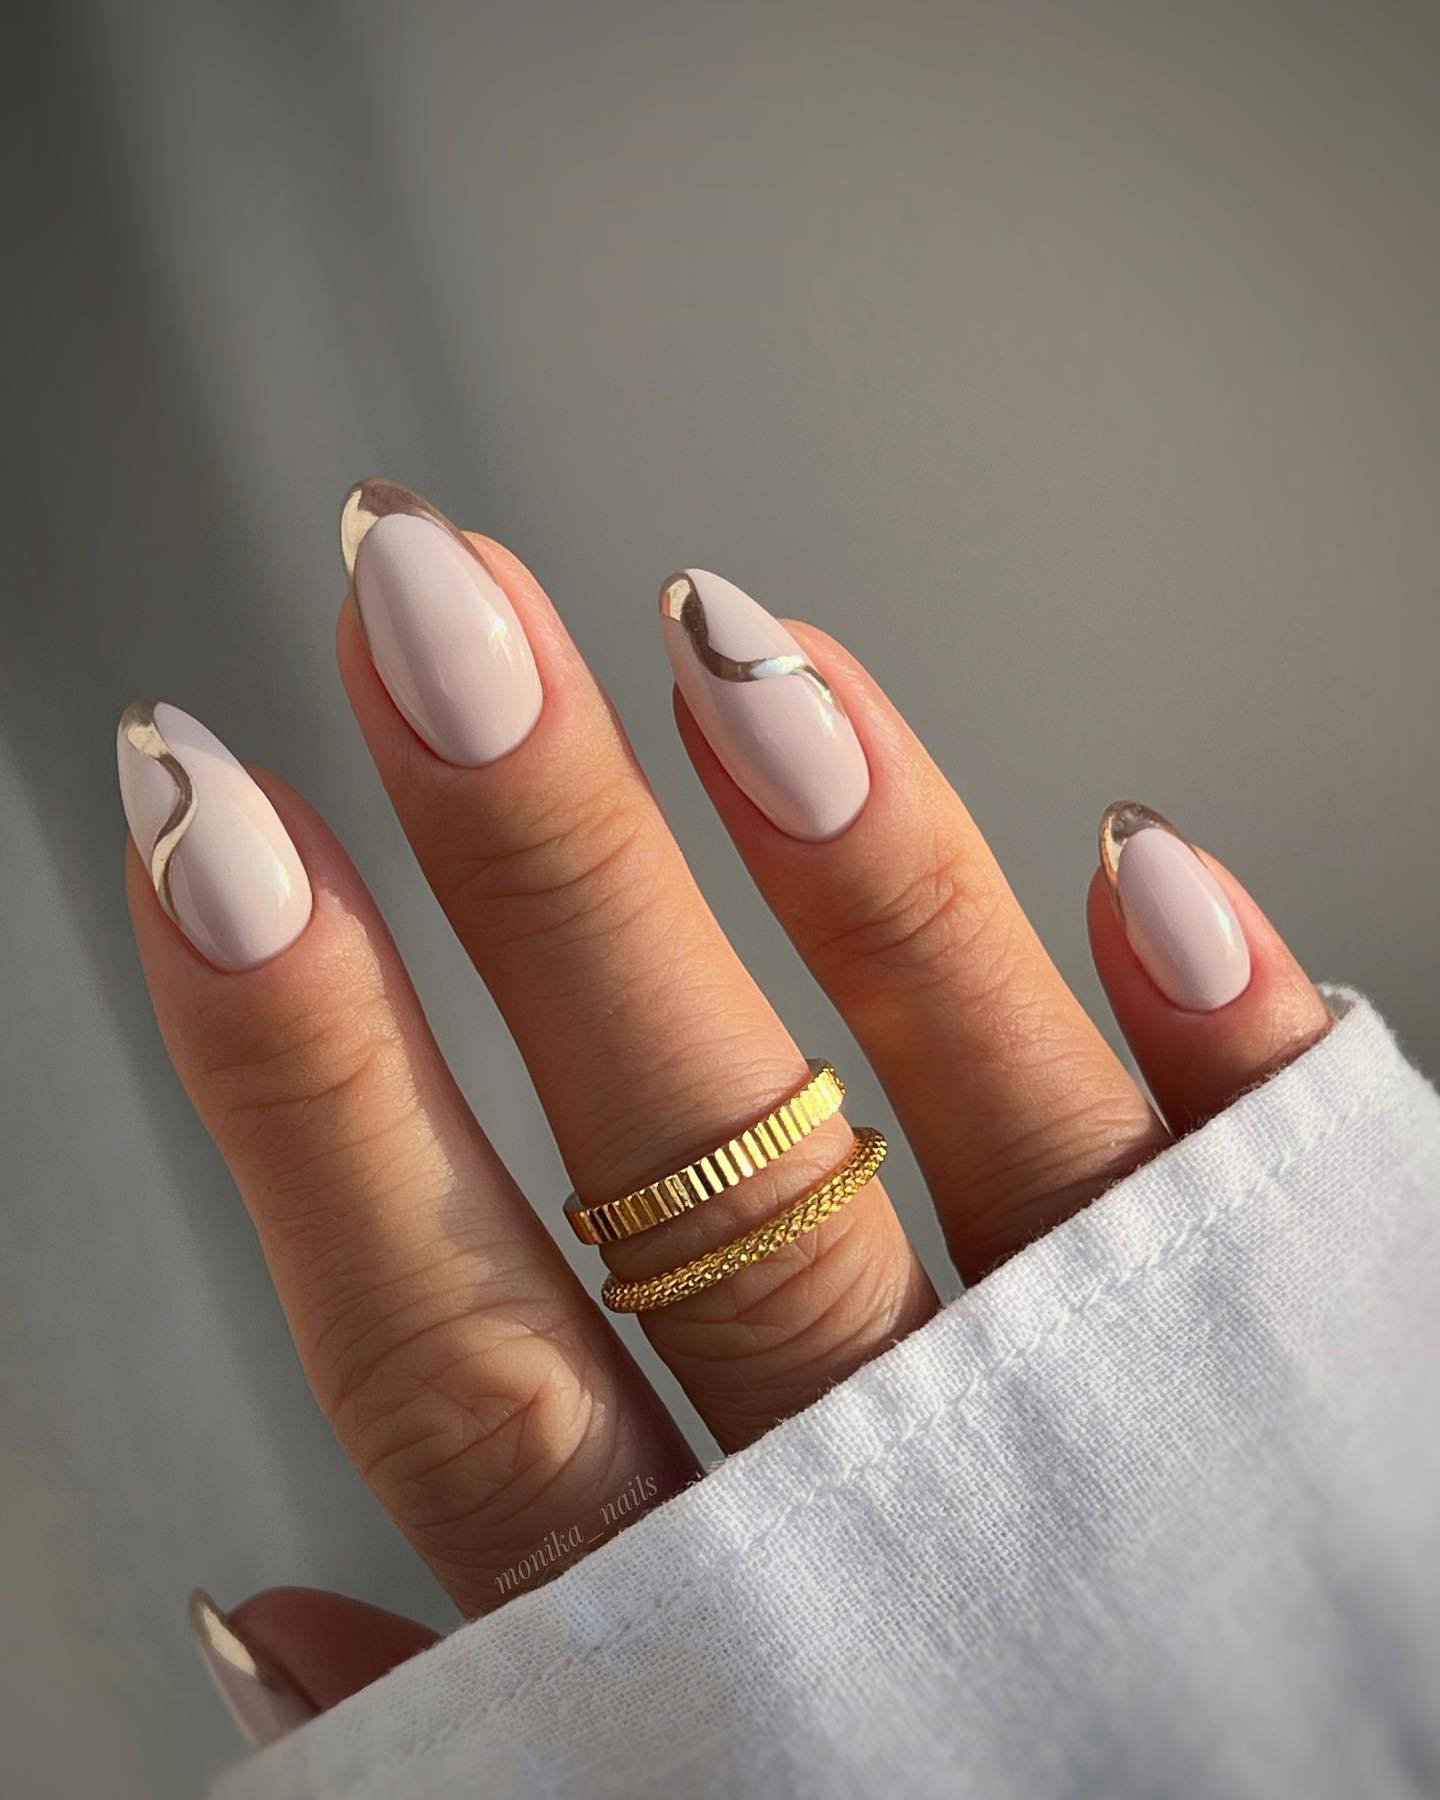 Chrome French Tip Manicure